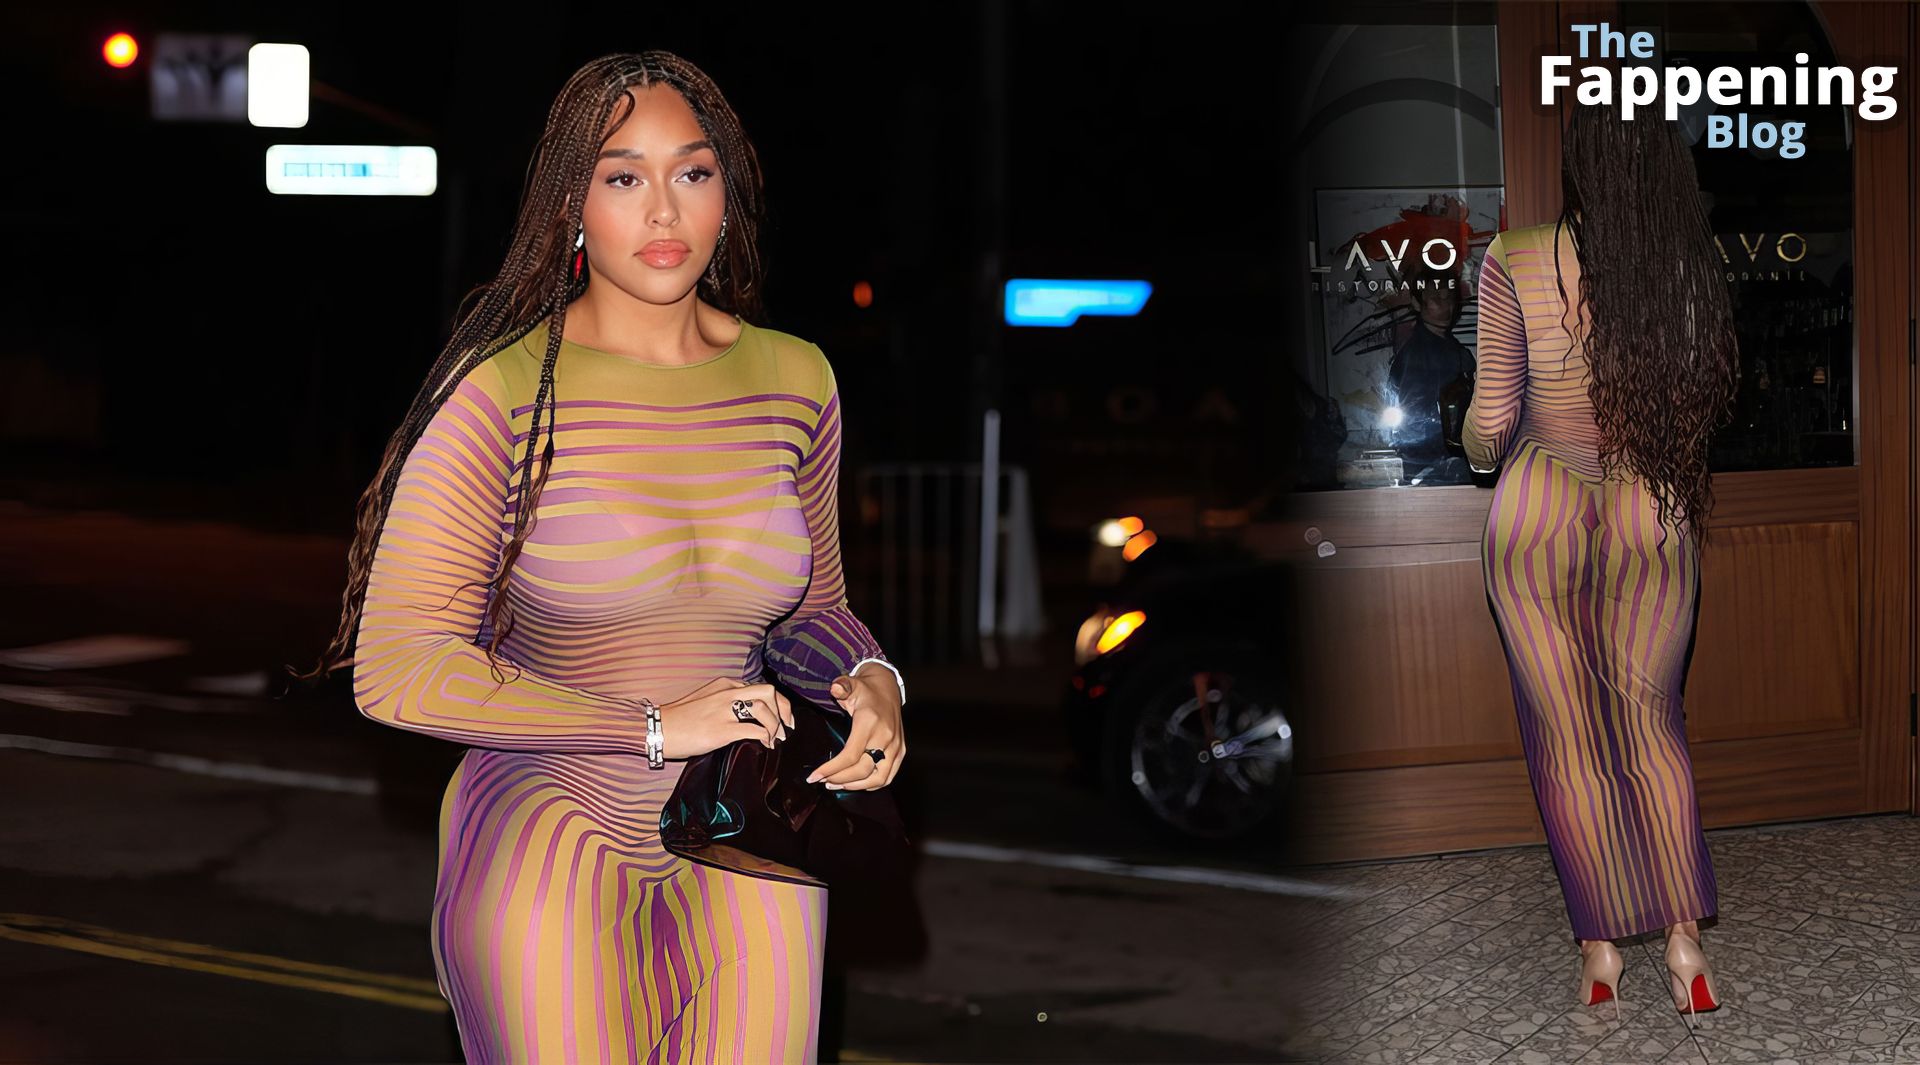 Jordyn Woods Stuns in a Jean Paul Gaultier Dress While Out for Dinner (29 Photos)